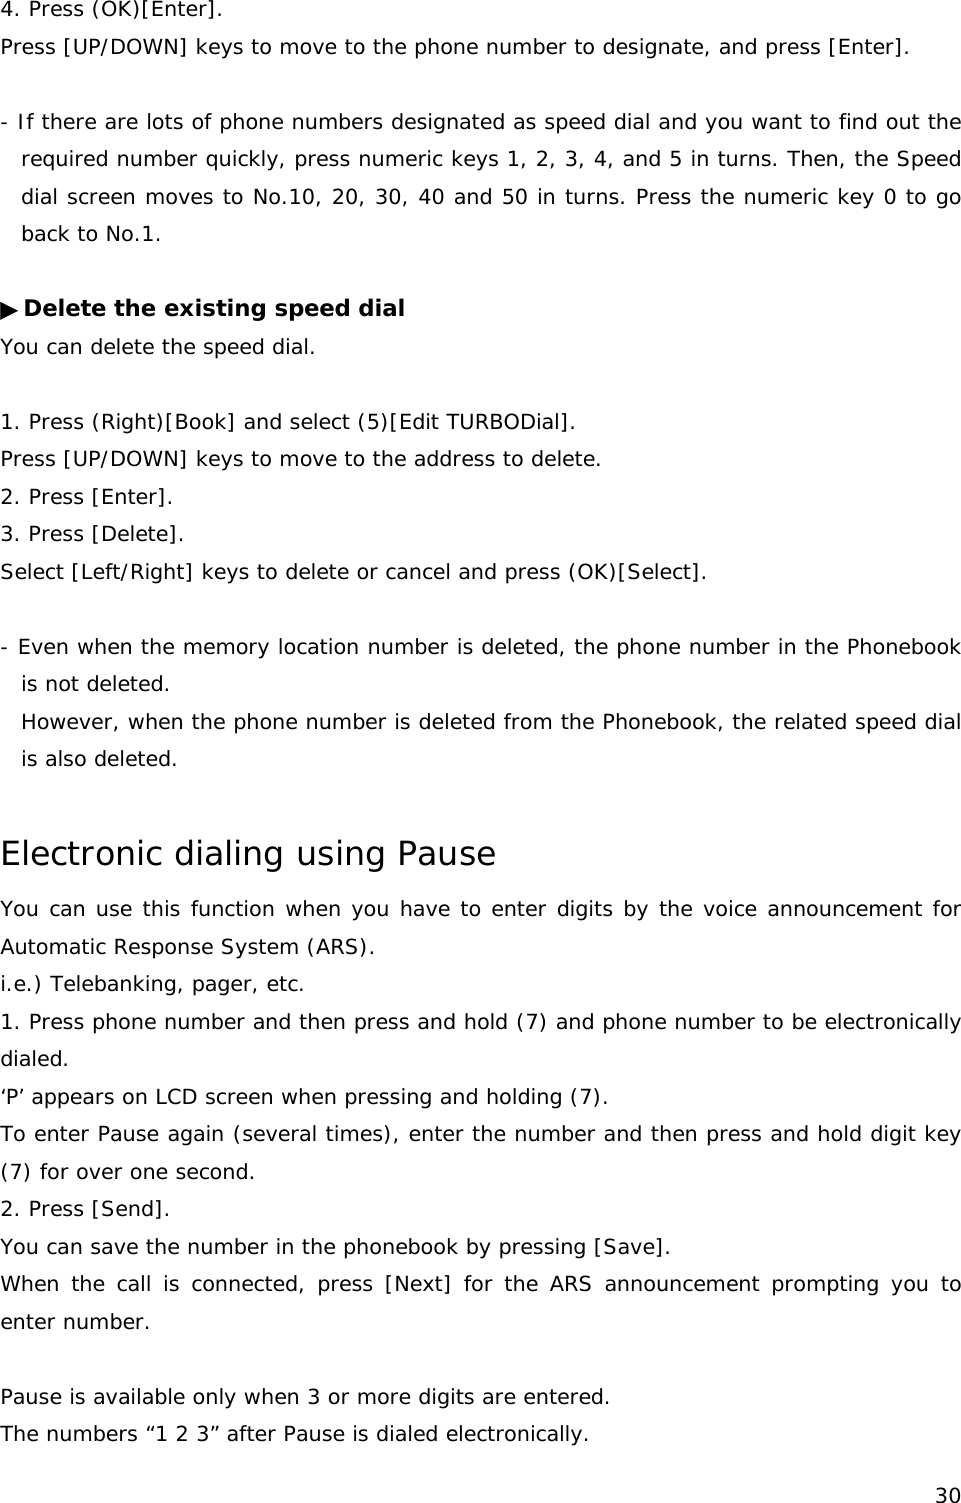 4. Press (OK)[Enter]. Press [UP/DOWN] keys to move to the phone number to designate, and press [Enter].  - If there are lots of phone numbers designated as speed dial and you want to find out the required number quickly, press numeric keys 1, 2, 3, 4, and 5 in turns. Then, the Speed dial screen moves to No.10, 20, 30, 40 and 50 in turns. Press the numeric key 0 to go back to No.1.  ▶Delete the existing speed dial You can delete the speed dial.  1. Press (Right)[Book] and select (5)[Edit TURBODial]. Press [UP/DOWN] keys to move to the address to delete.  2. Press [Enter]. 3. Press [Delete]. Select [Left/Right] keys to delete or cancel and press (OK)[Select].  - Even when the memory location number is deleted, the phone number in the Phonebook is not deleted. However, when the phone number is deleted from the Phonebook, the related speed dial is also deleted.  Electronic dialing using Pause  You can use this function when you have to enter digits by the voice announcement for Automatic Response System (ARS). i.e.) Telebanking, pager, etc. 1. Press phone number and then press and hold (7) and phone number to be electronically dialed. ‘P’ appears on LCD screen when pressing and holding (7). To enter Pause again (several times), enter the number and then press and hold digit key (7) for over one second. 2. Press [Send].  You can save the number in the phonebook by pressing [Save]. When the call is connected, press [Next] for the ARS announcement prompting you to enter number.  Pause is available only when 3 or more digits are entered. The numbers “1 2 3” after Pause is dialed electronically.  30